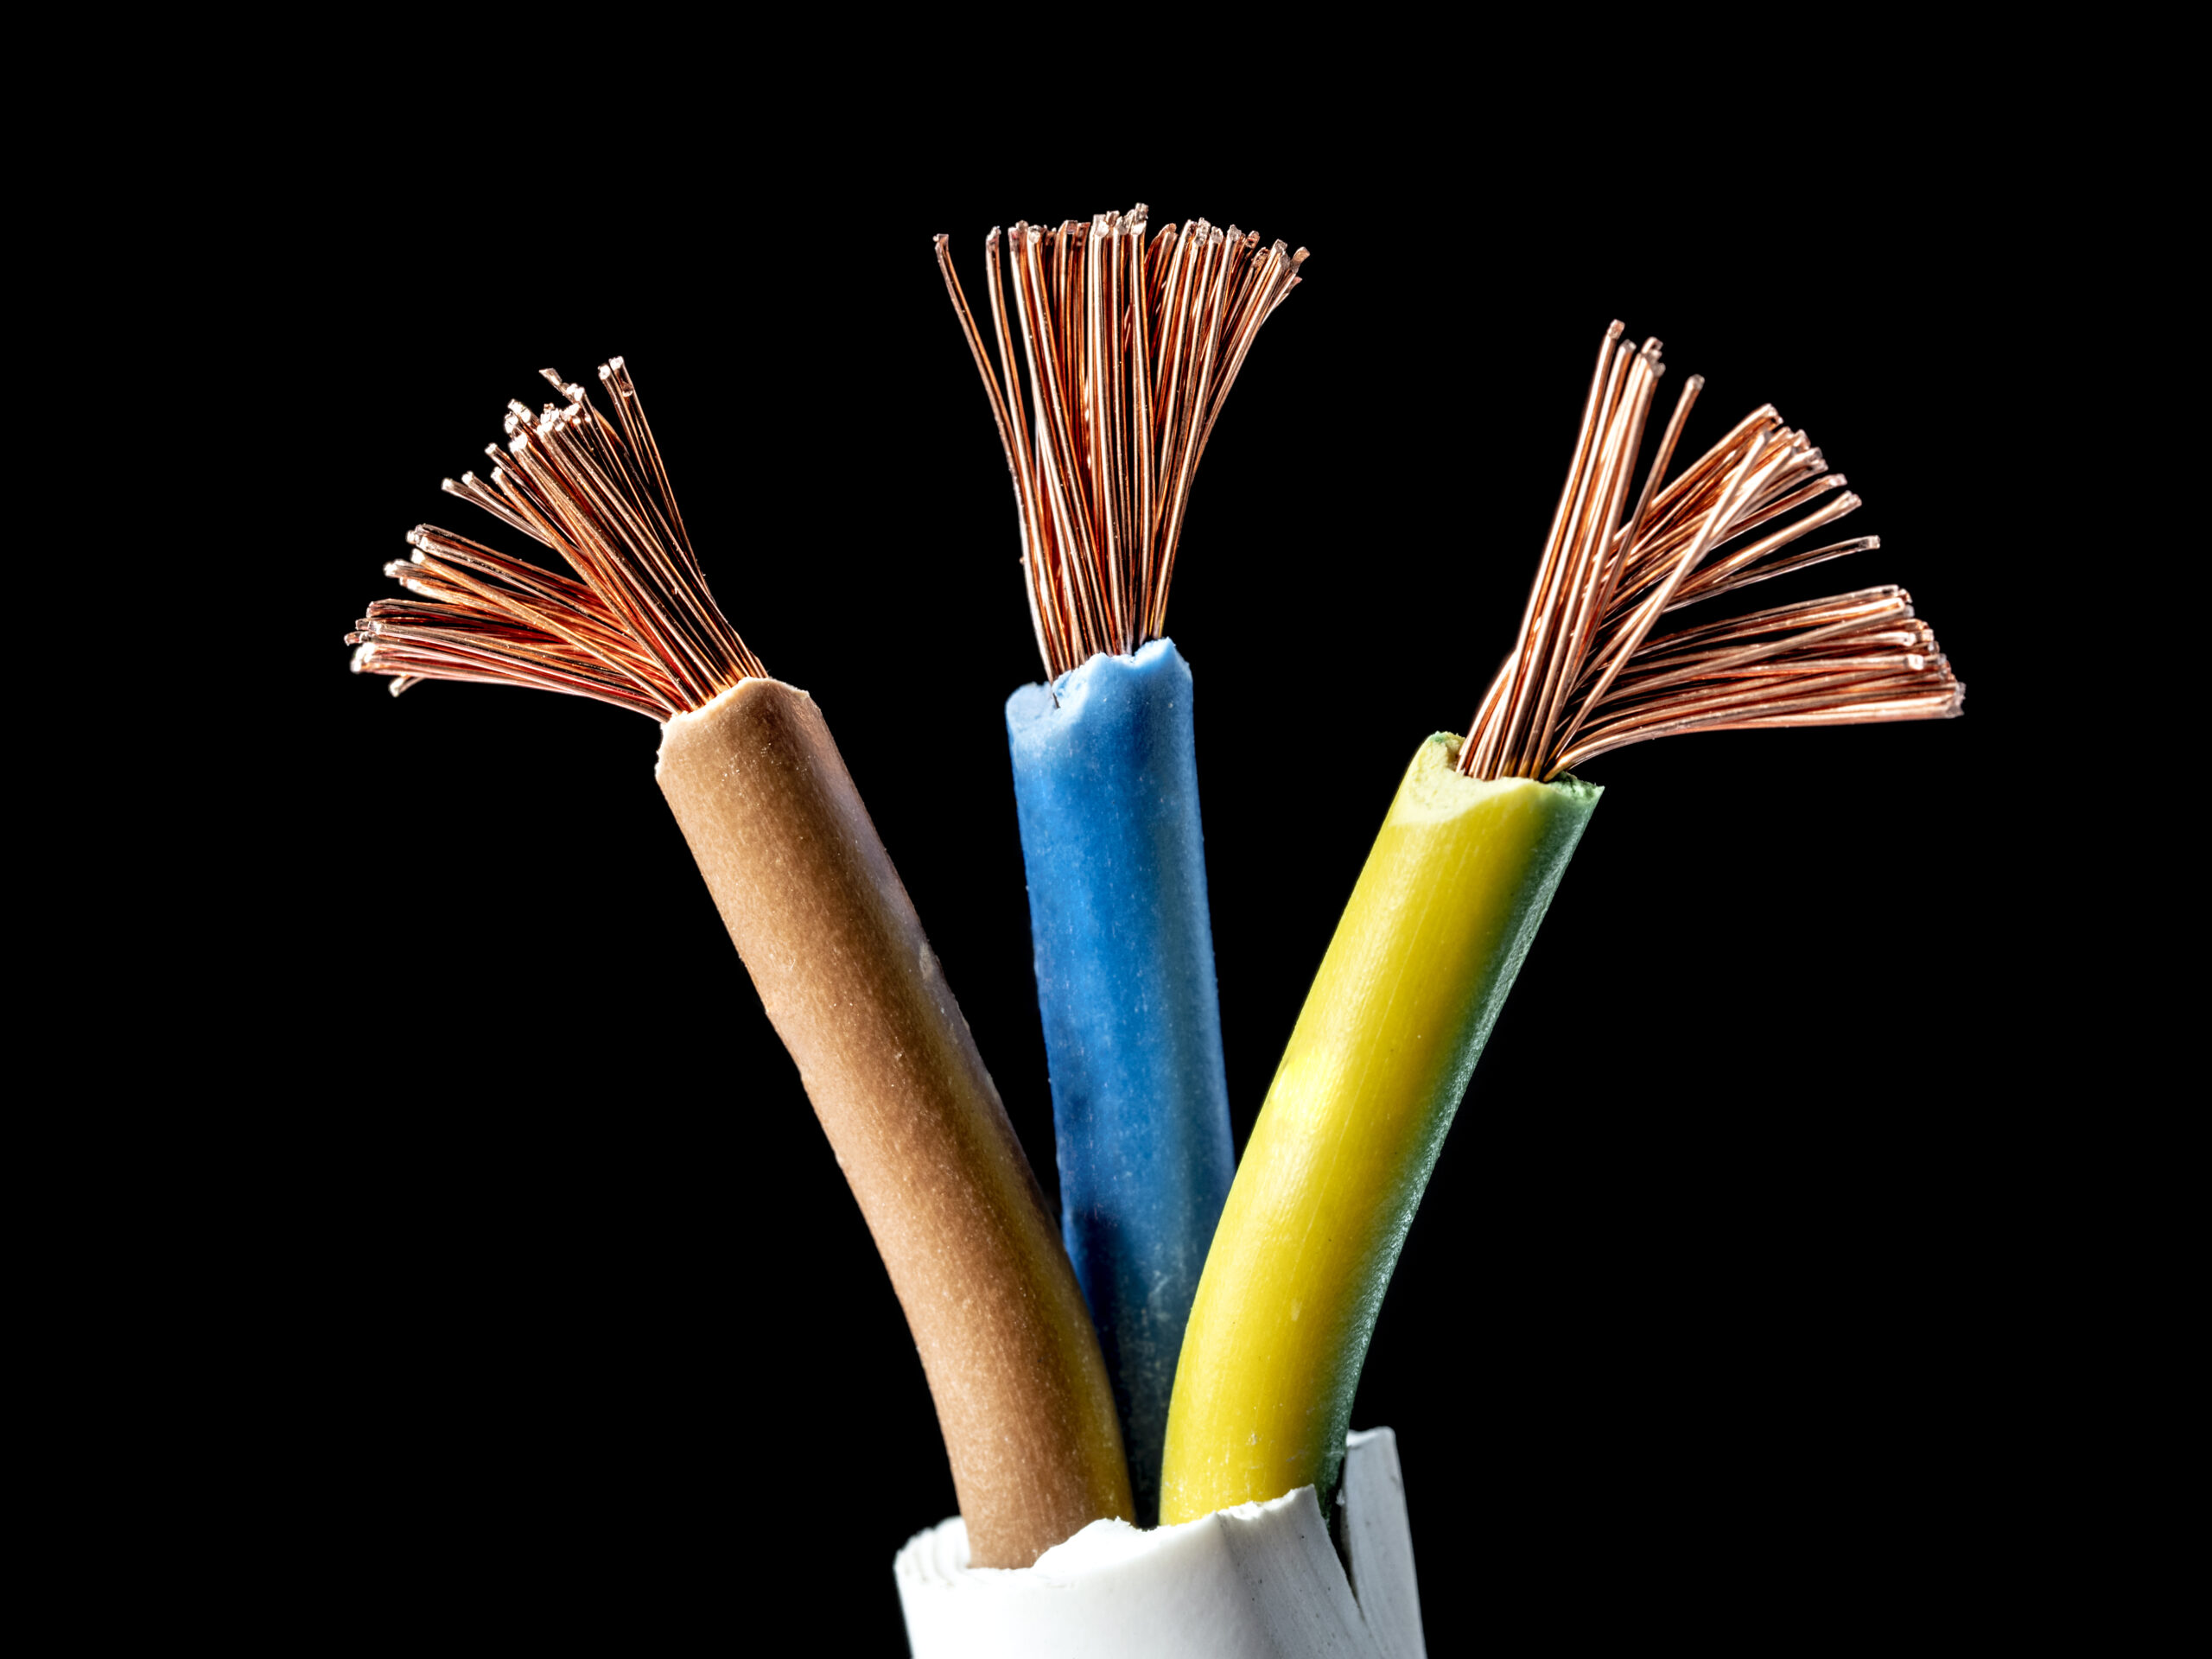 three power cables wrapped in orange, blue and yellow plastic with copper wires fraying at the ends